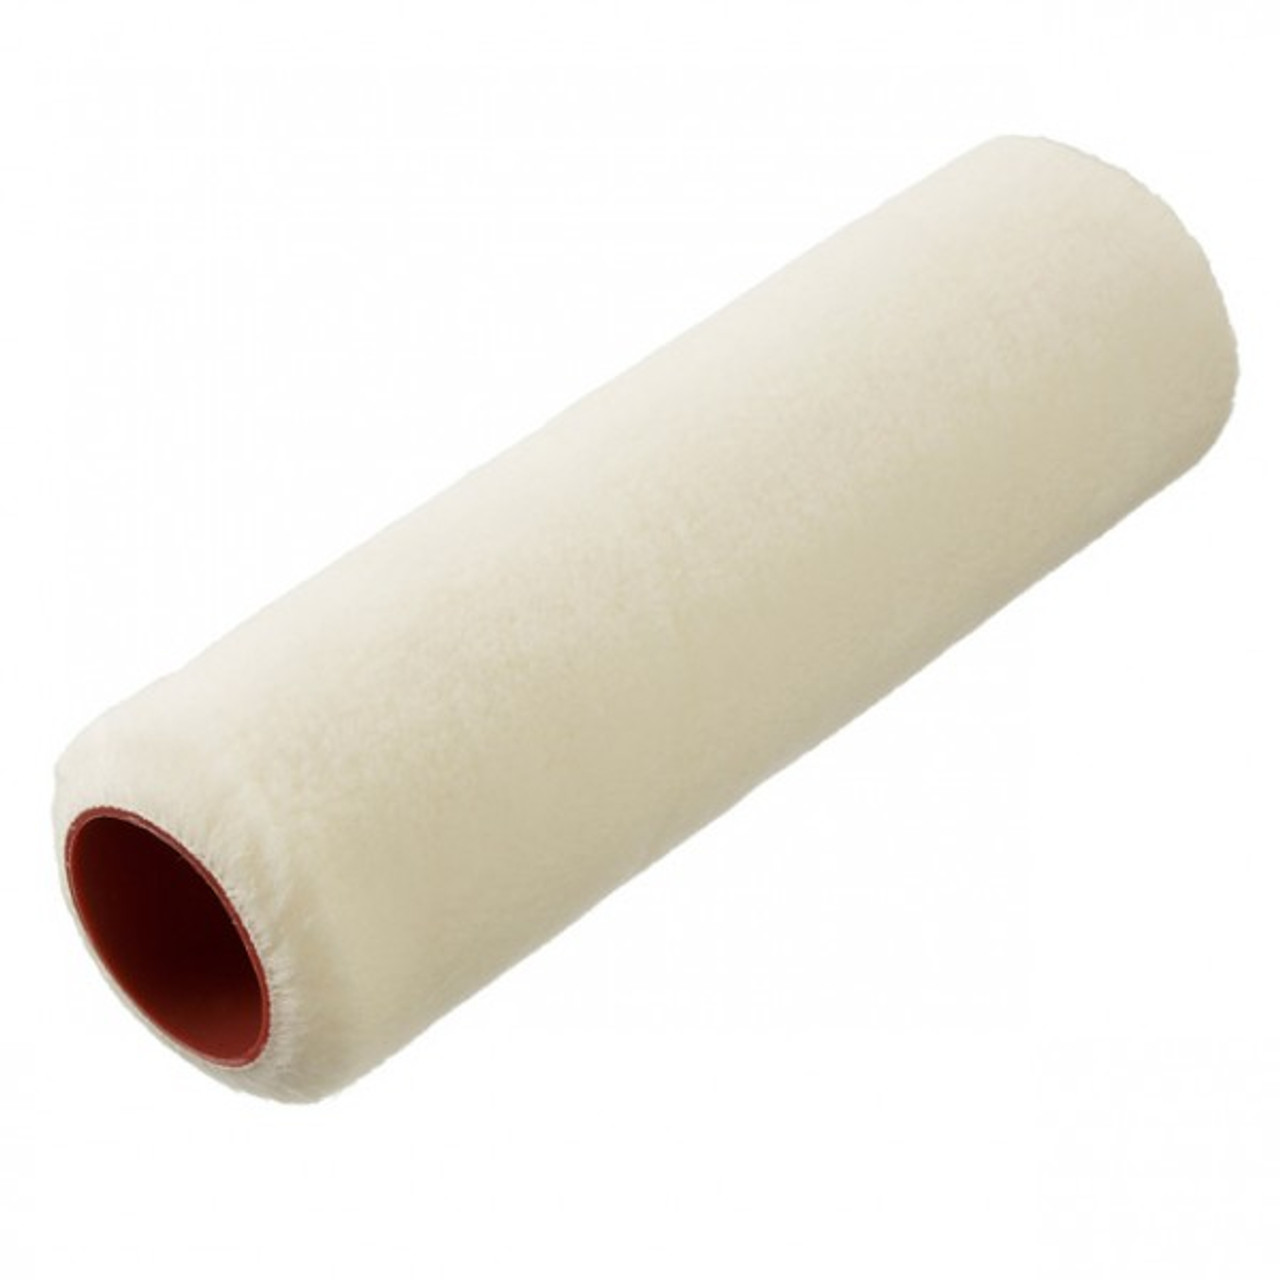 IMPA 510339 SPARE PAINT ROLLER REPLACEMENT 230mm